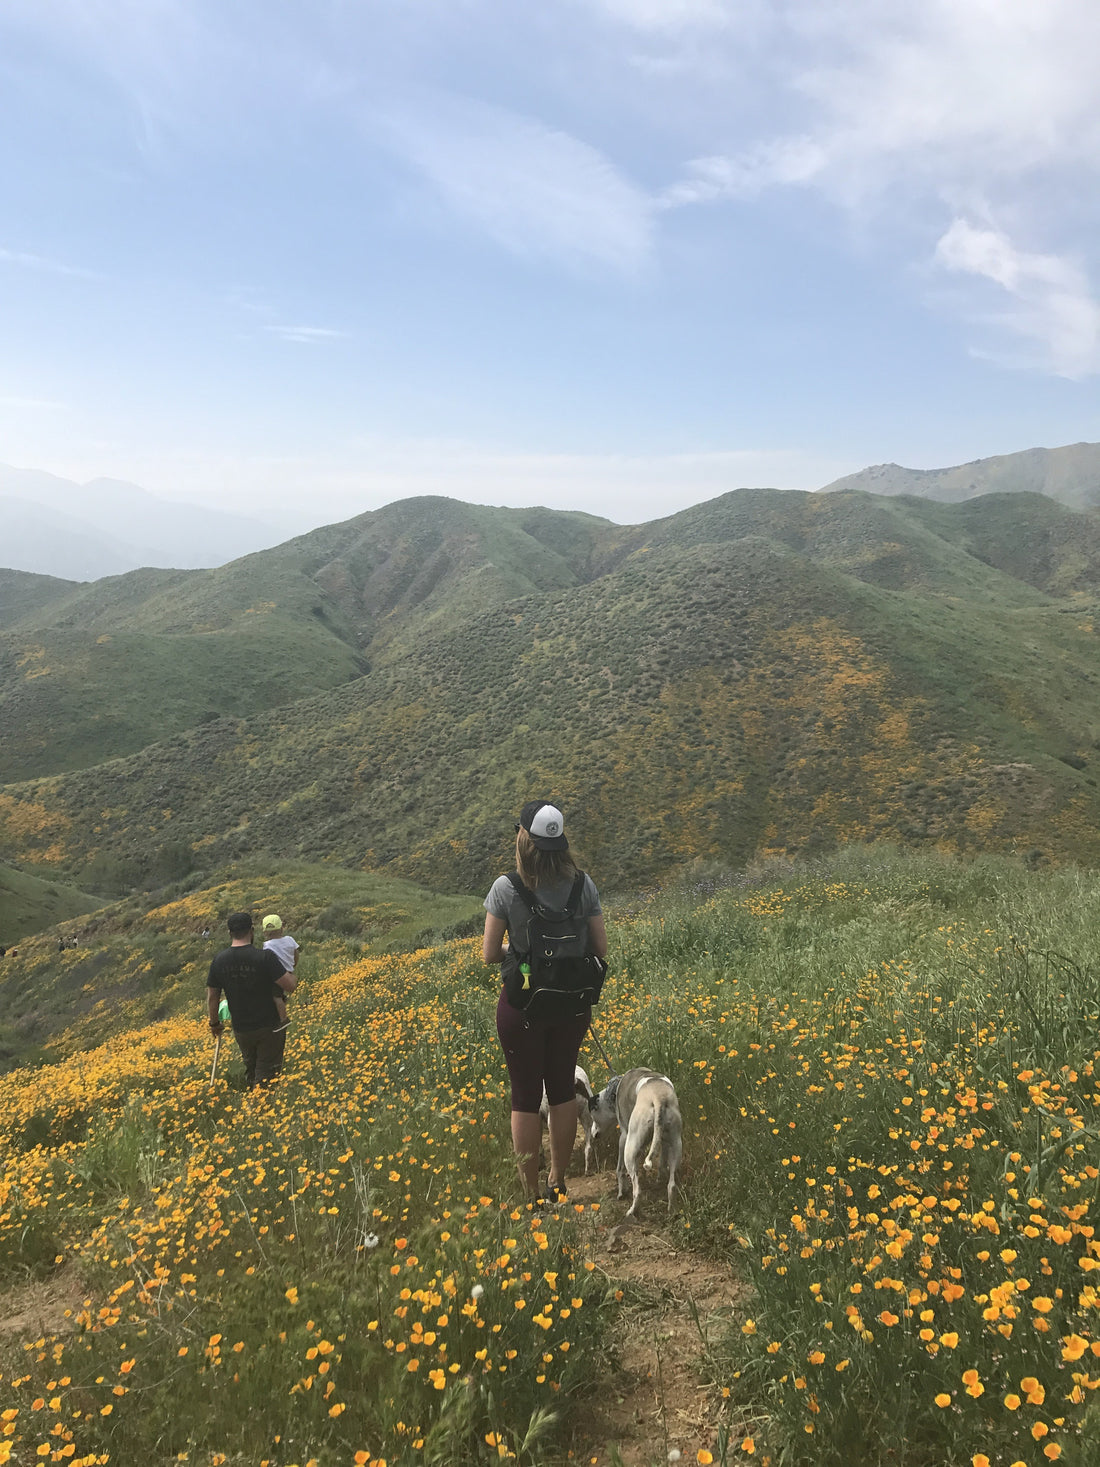 Thread Spun founders take a break from surfing to hike Southern California.